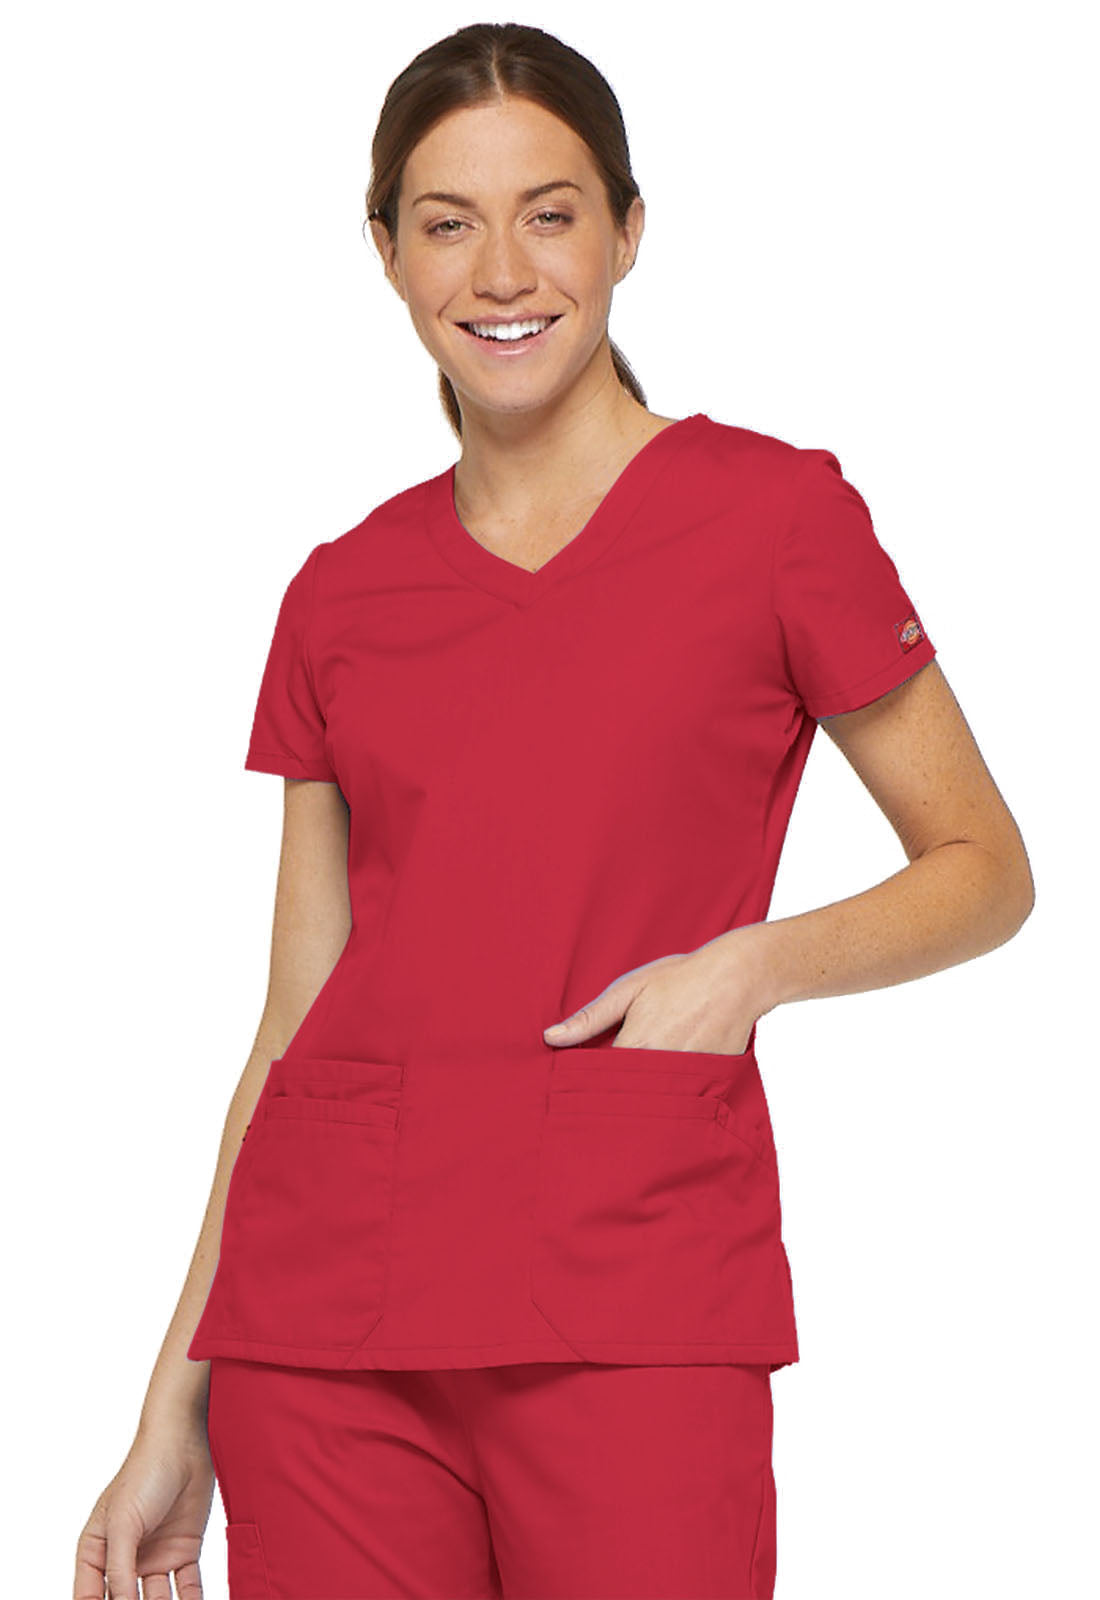 Exist. Conjunto Mujer Dickies EDS Signature Mod.85906/86206 Red